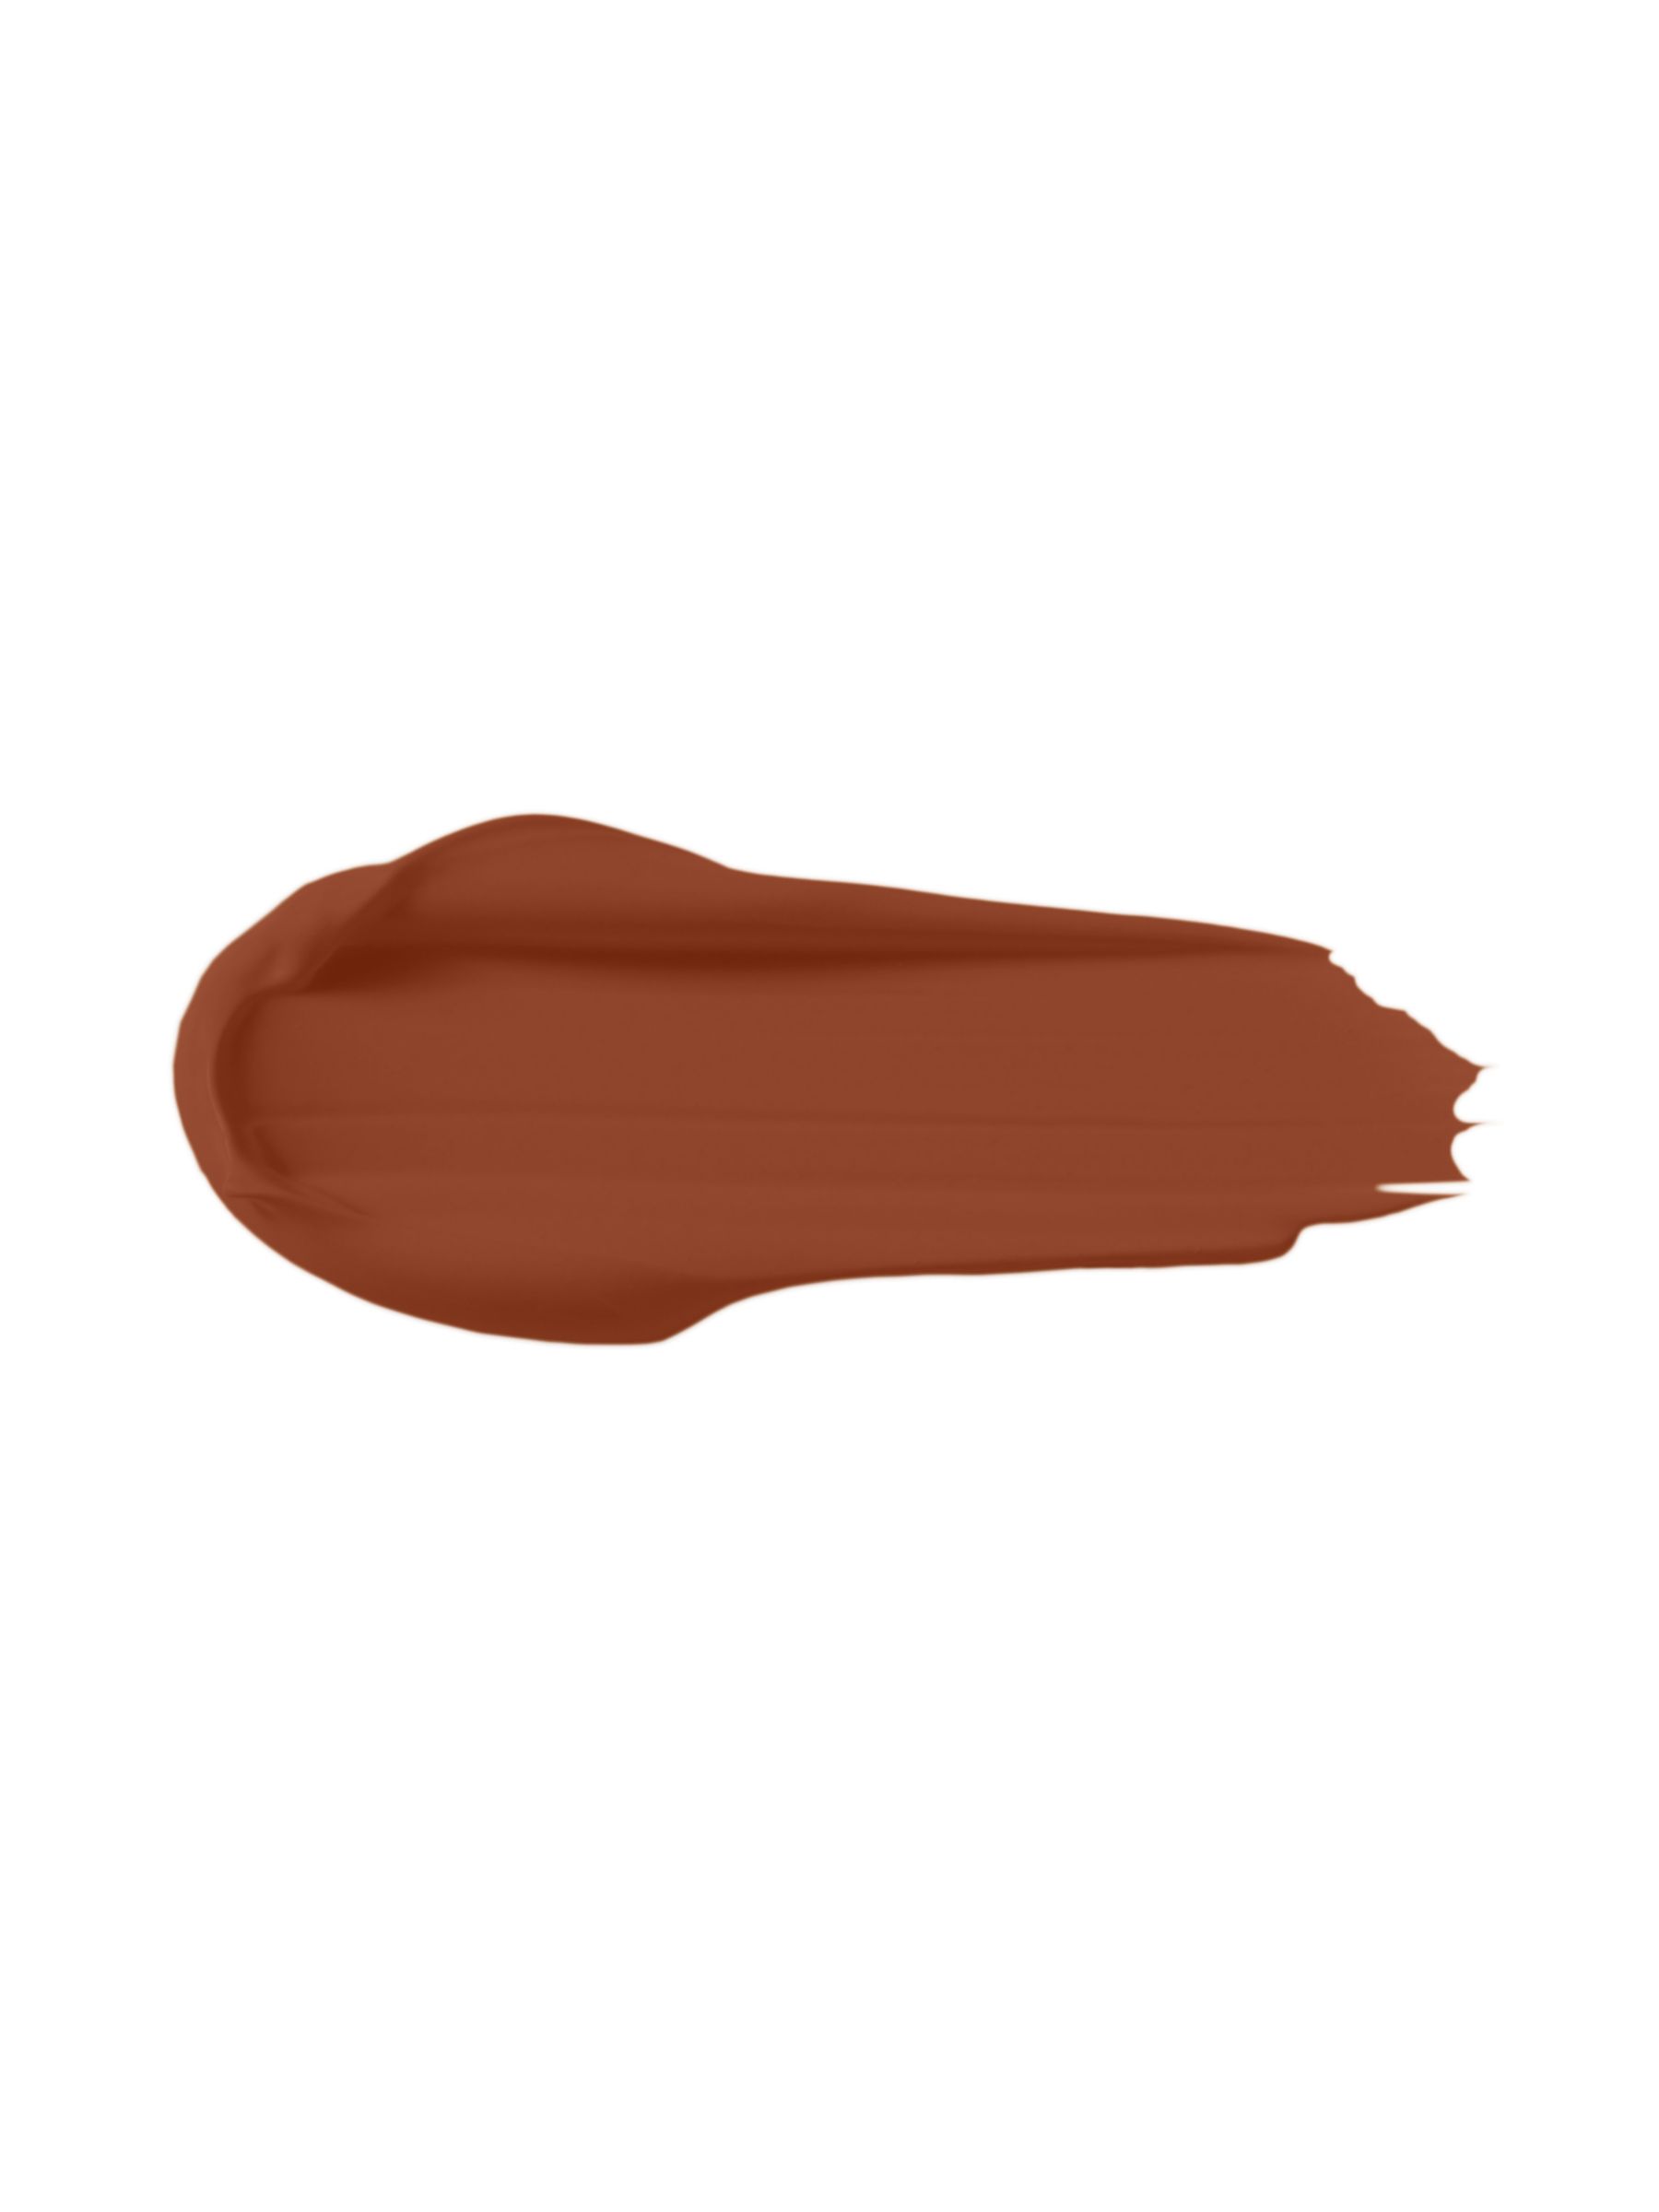 Too Faced Melted Chocolate Matte Eyeshadow, Chocolate Chai